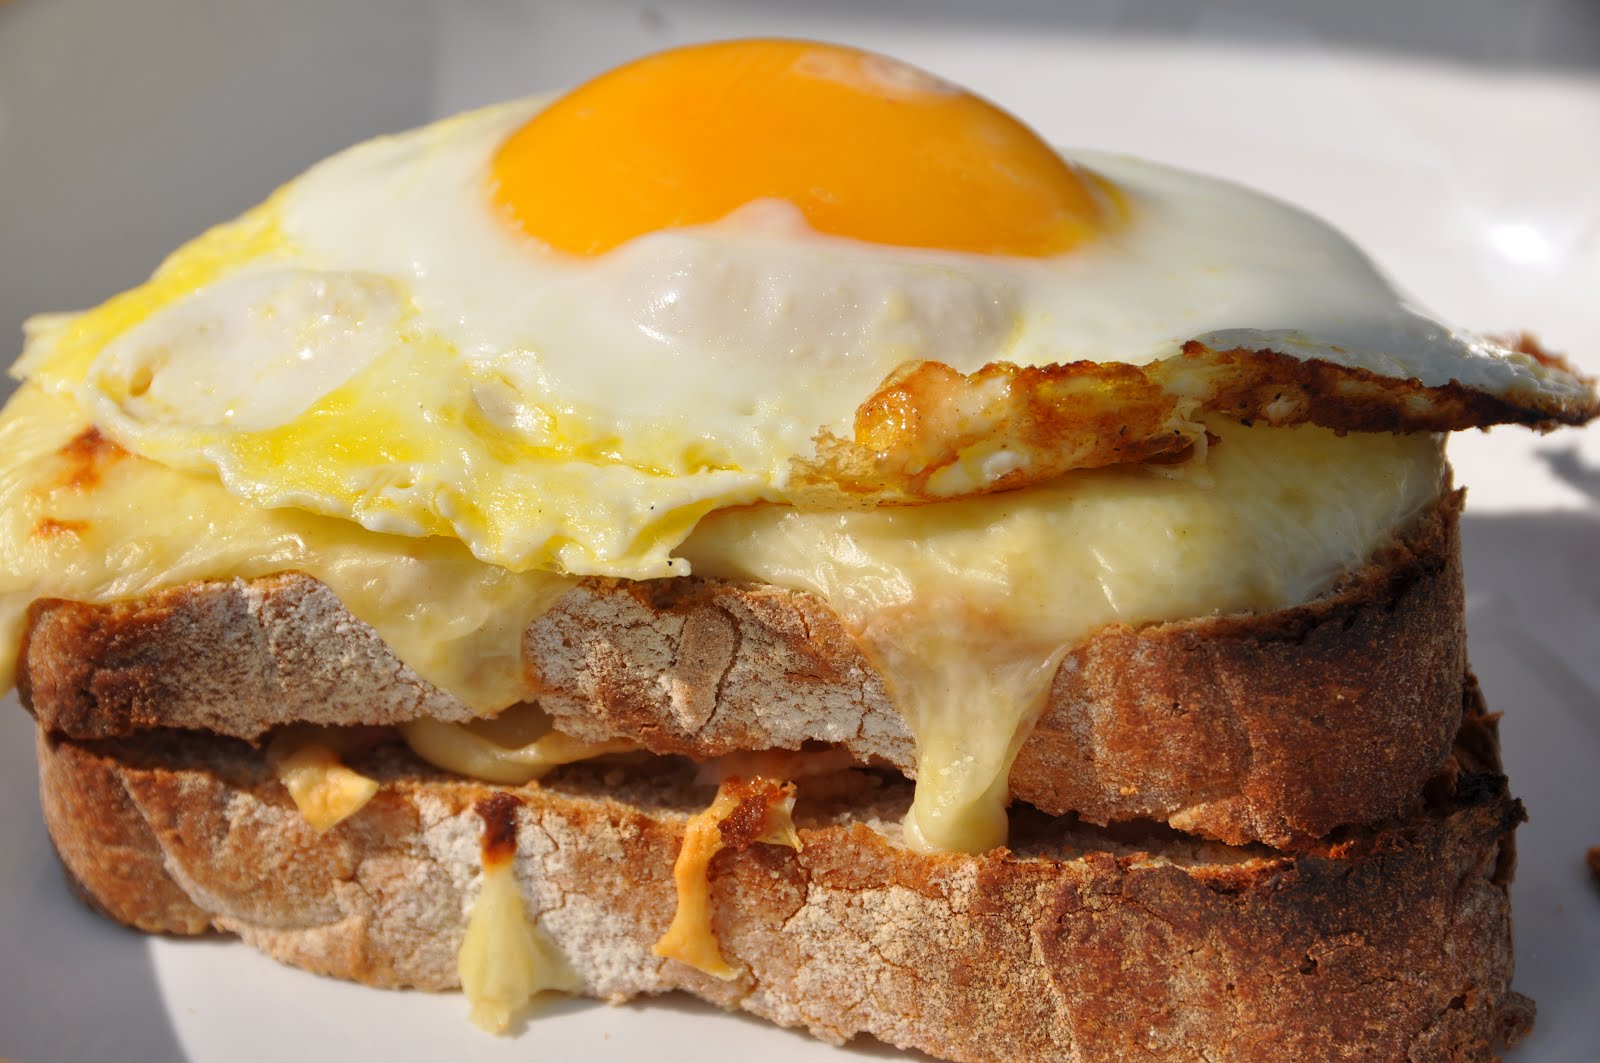 The View from My Italian Kitchen: Recipe: A Decadent Croque Madame